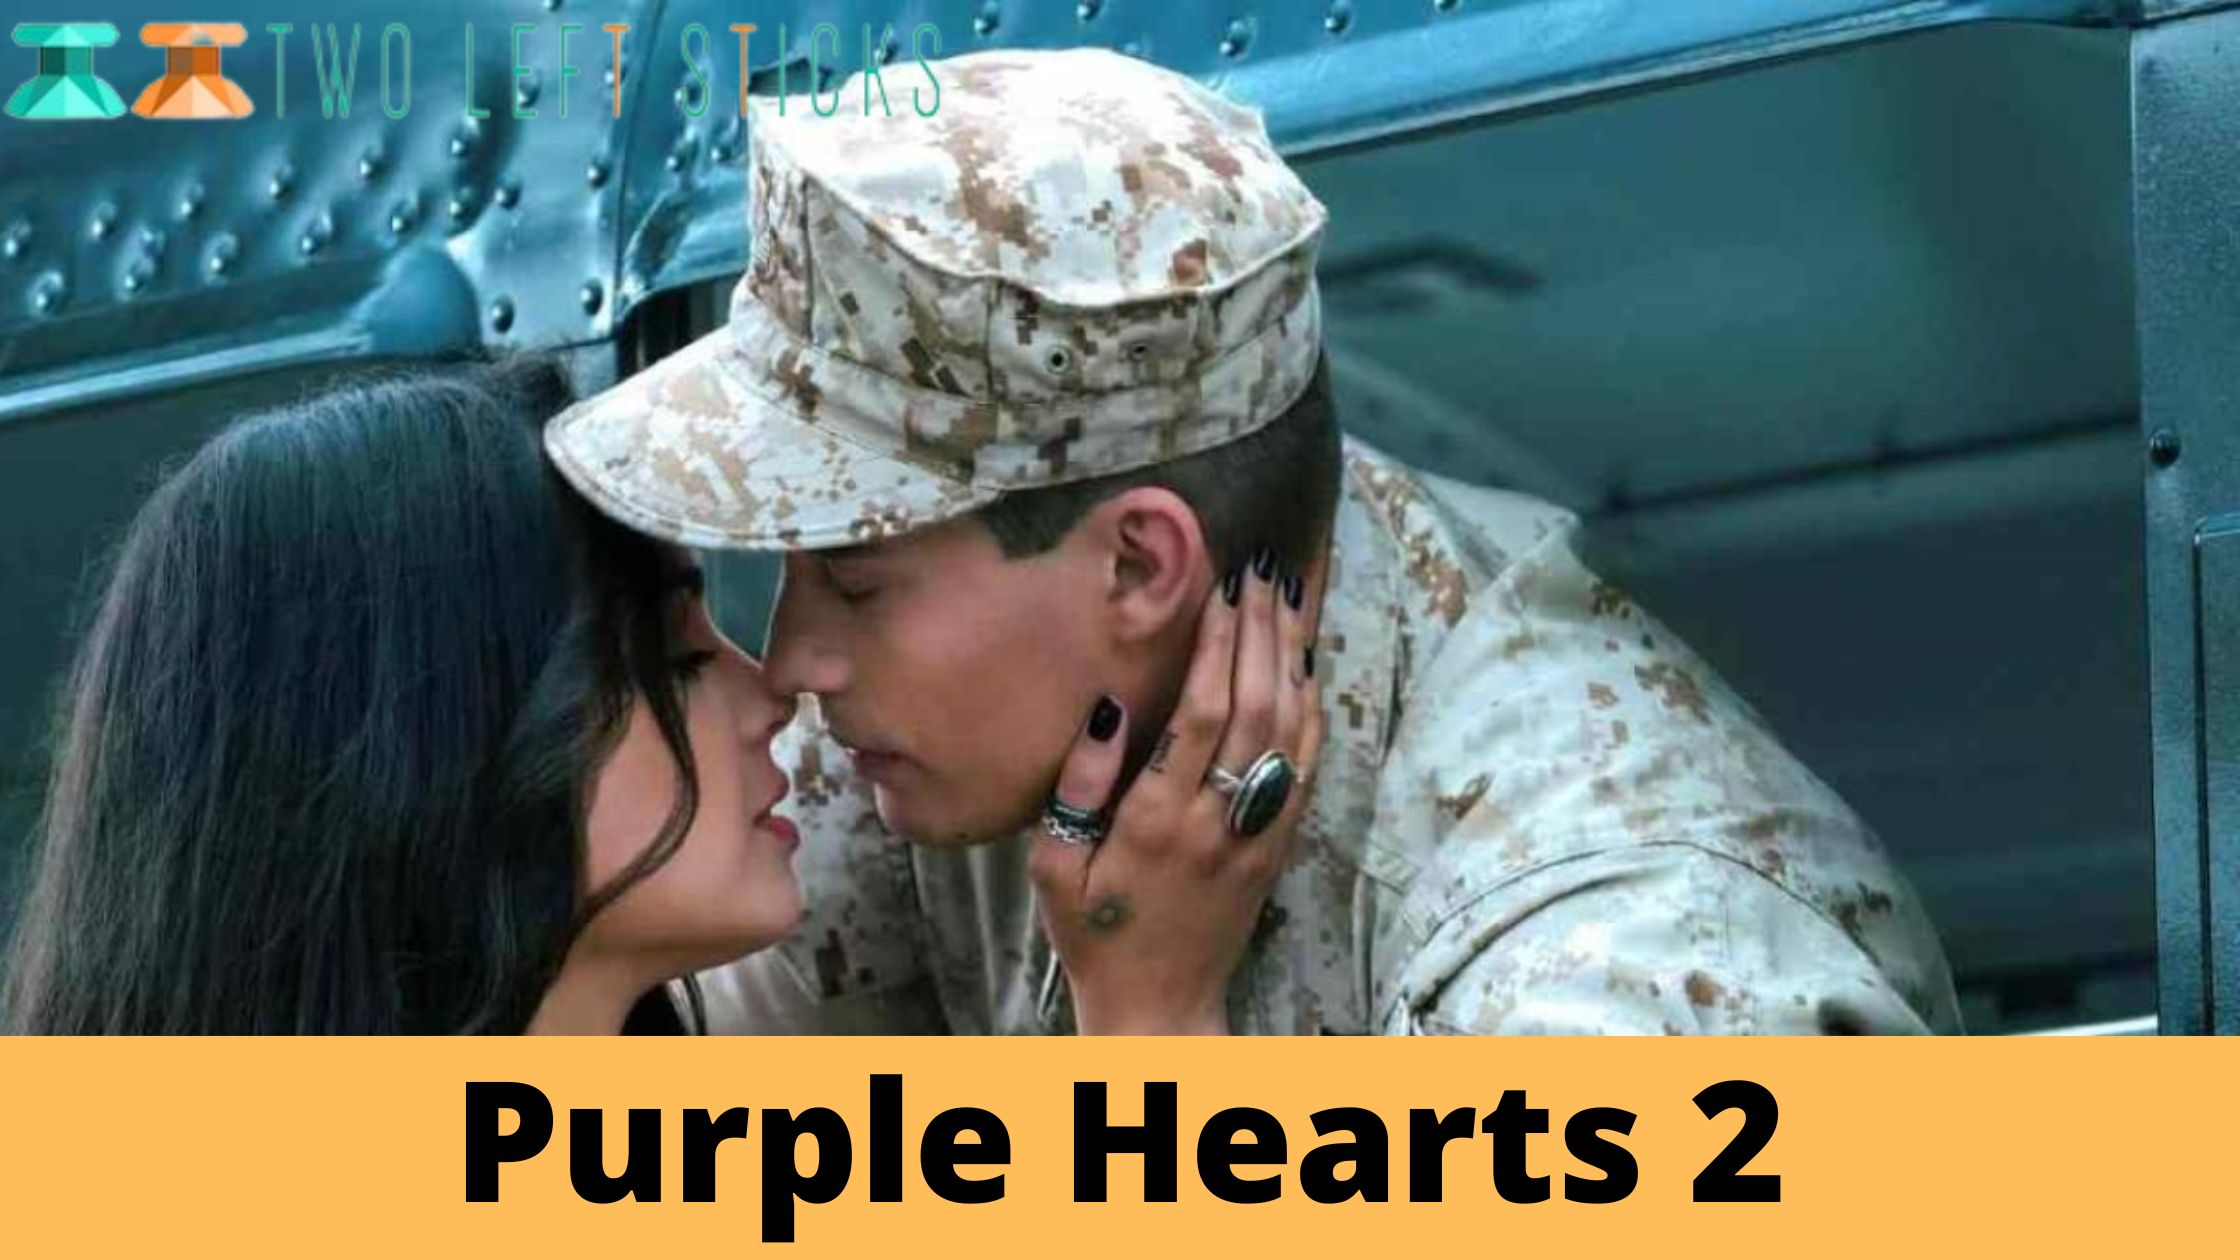 Purple Hearts 2- Is there going to be a Netflix movie sequel?